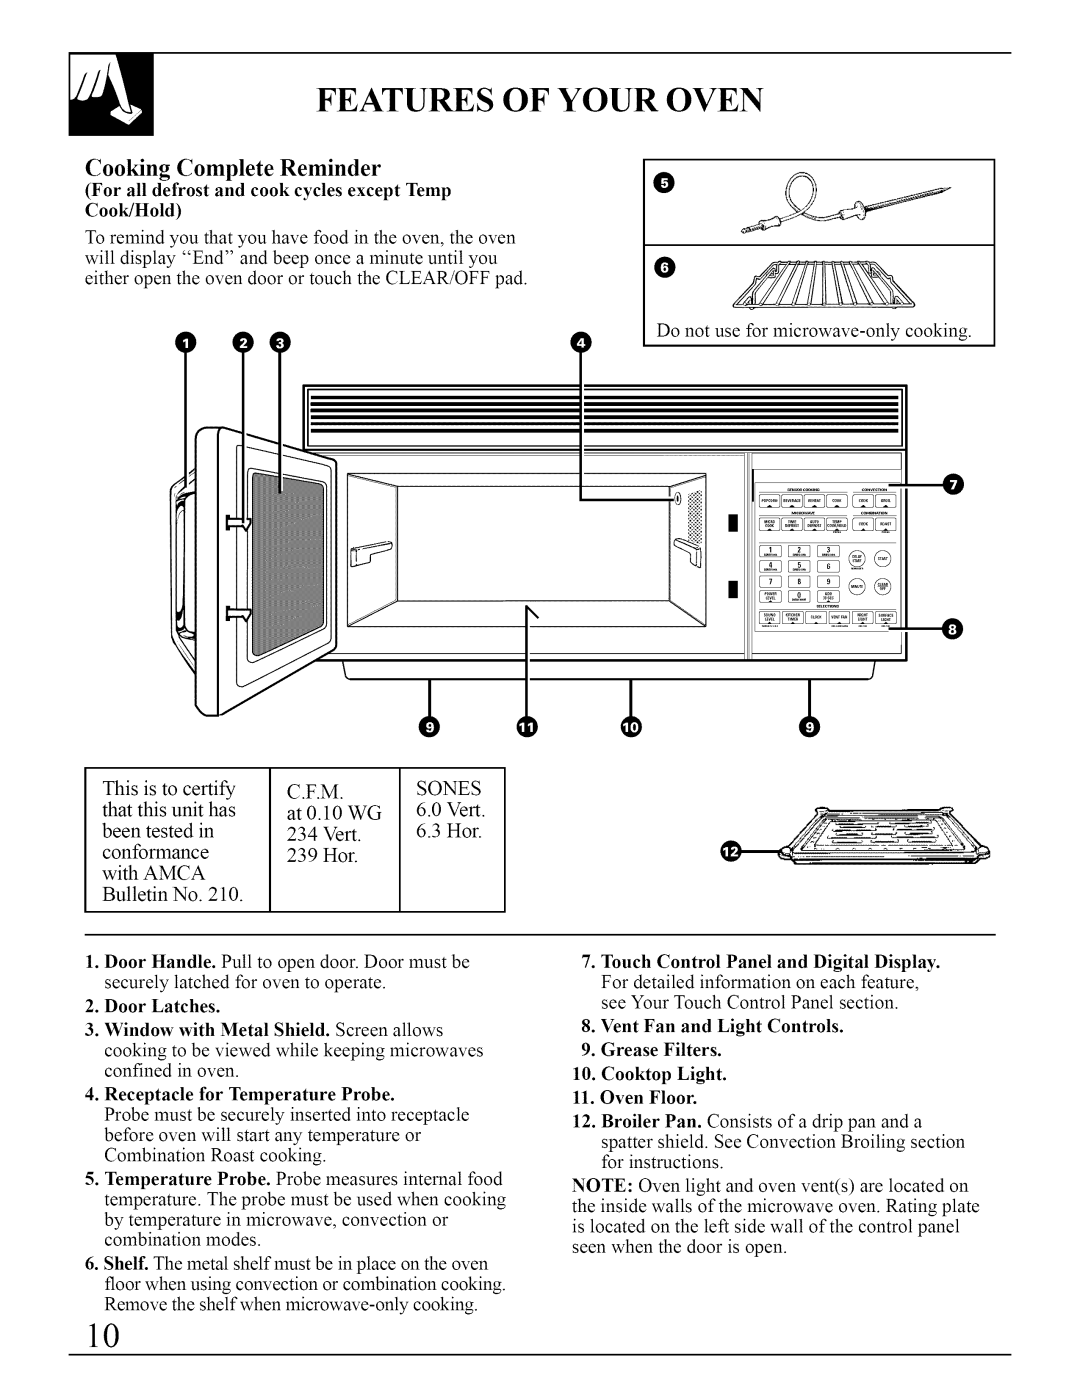 GE JVM290 manual Features, Of Your, Oven, Cooking Complete Reminder 